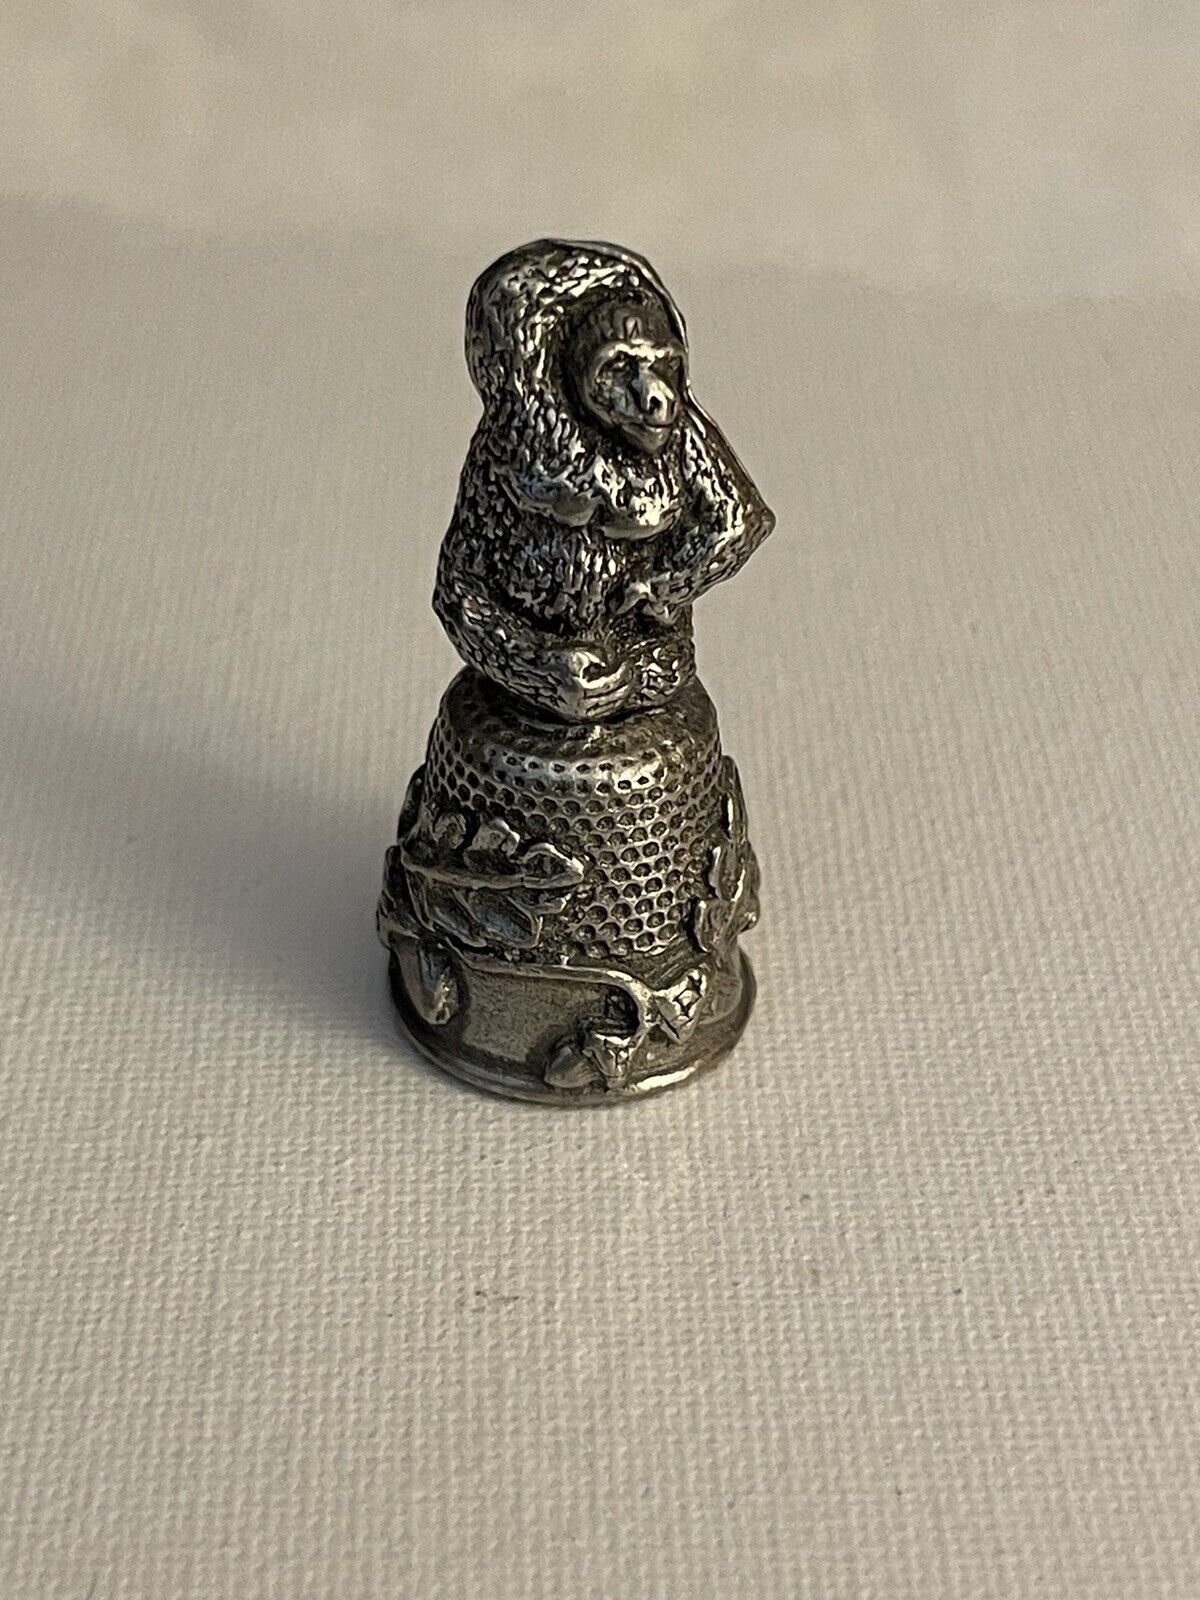 Vintage Large Gorilla Thimble Figural Nice Detail Very Good Condition